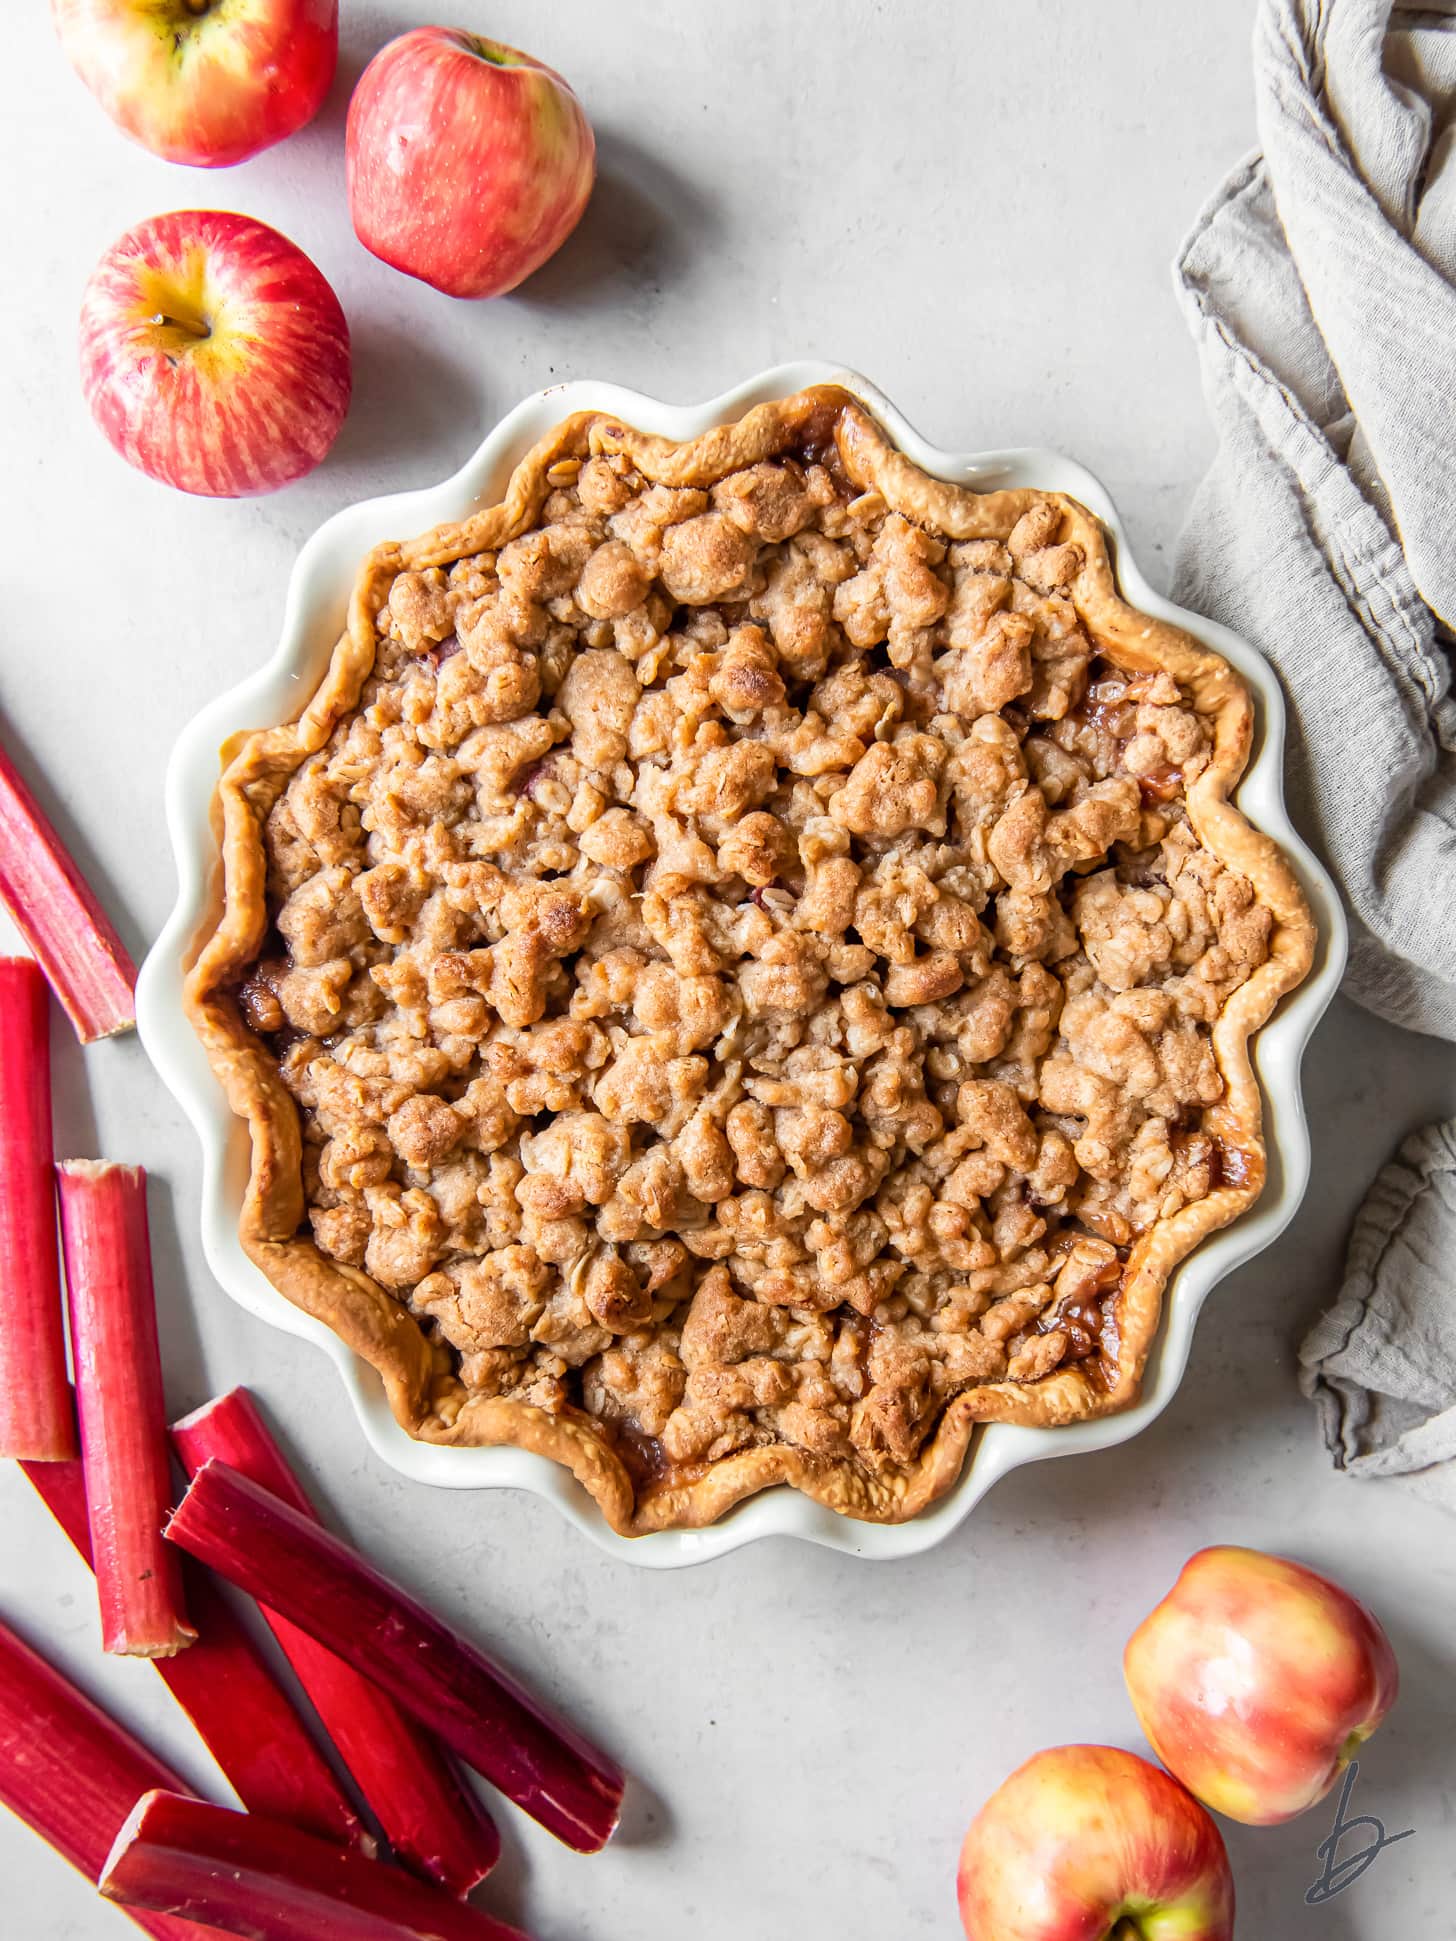 unsliced apple rhubarb pie with crumb topping next to fresh apples and rhubarb.